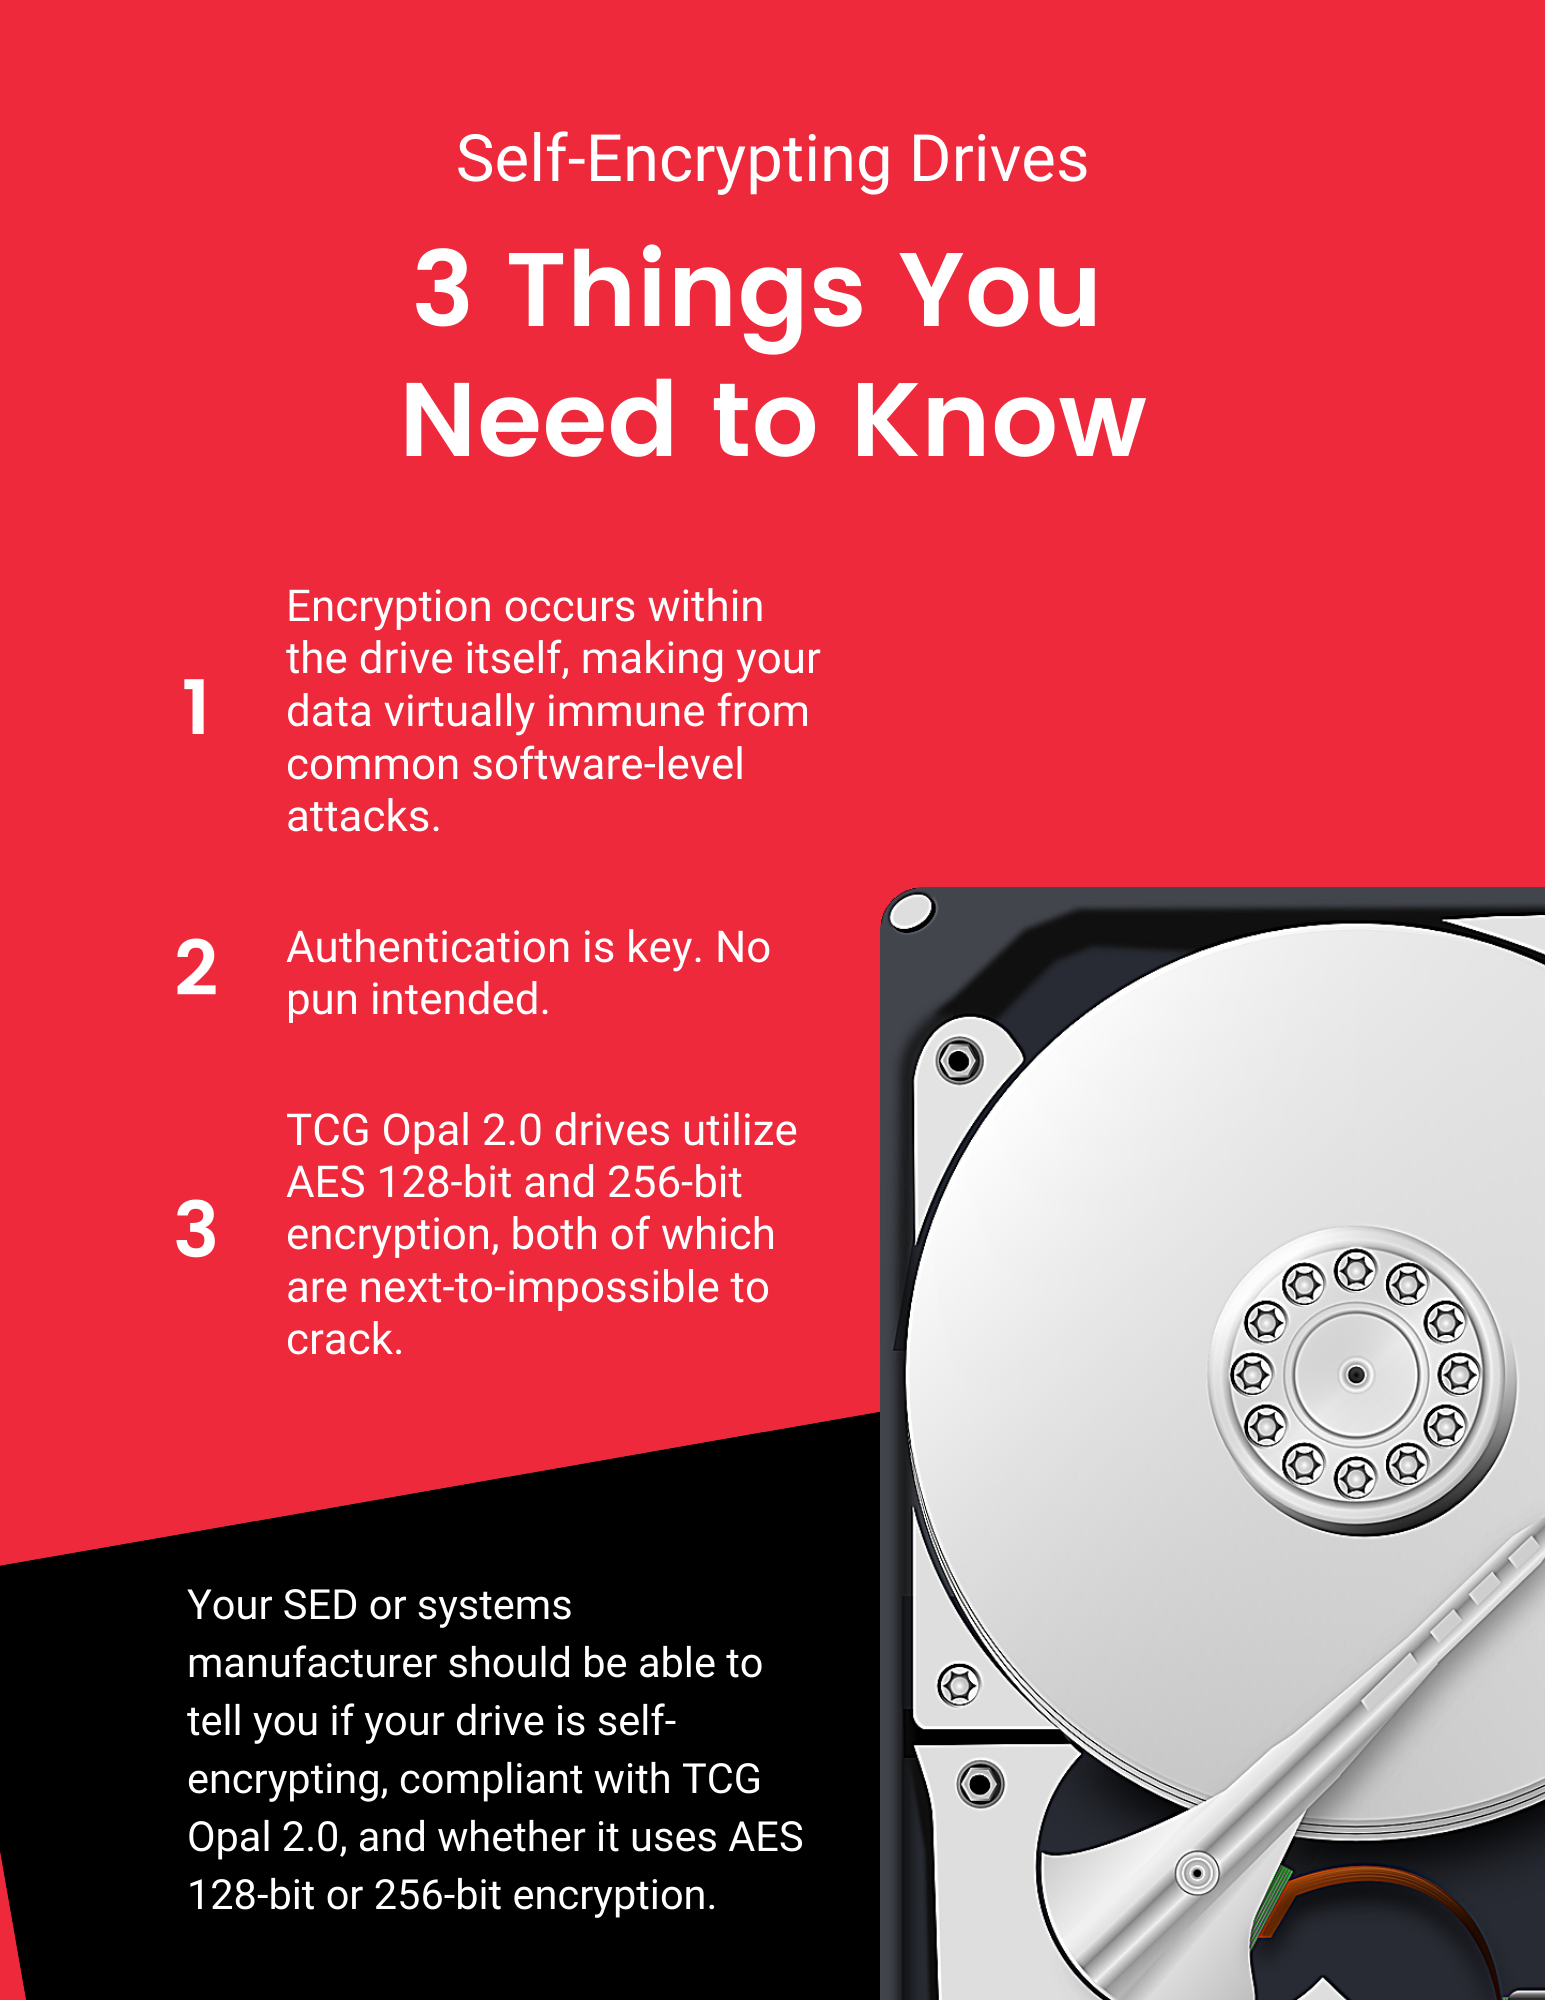 Three Things You Need to Know About SEDs: Encryption Occurs on the Drive Itself, Authentication is Key, and TCG Opal 2.0 drives support AES 128-bit encryption and 256-bit encryption.